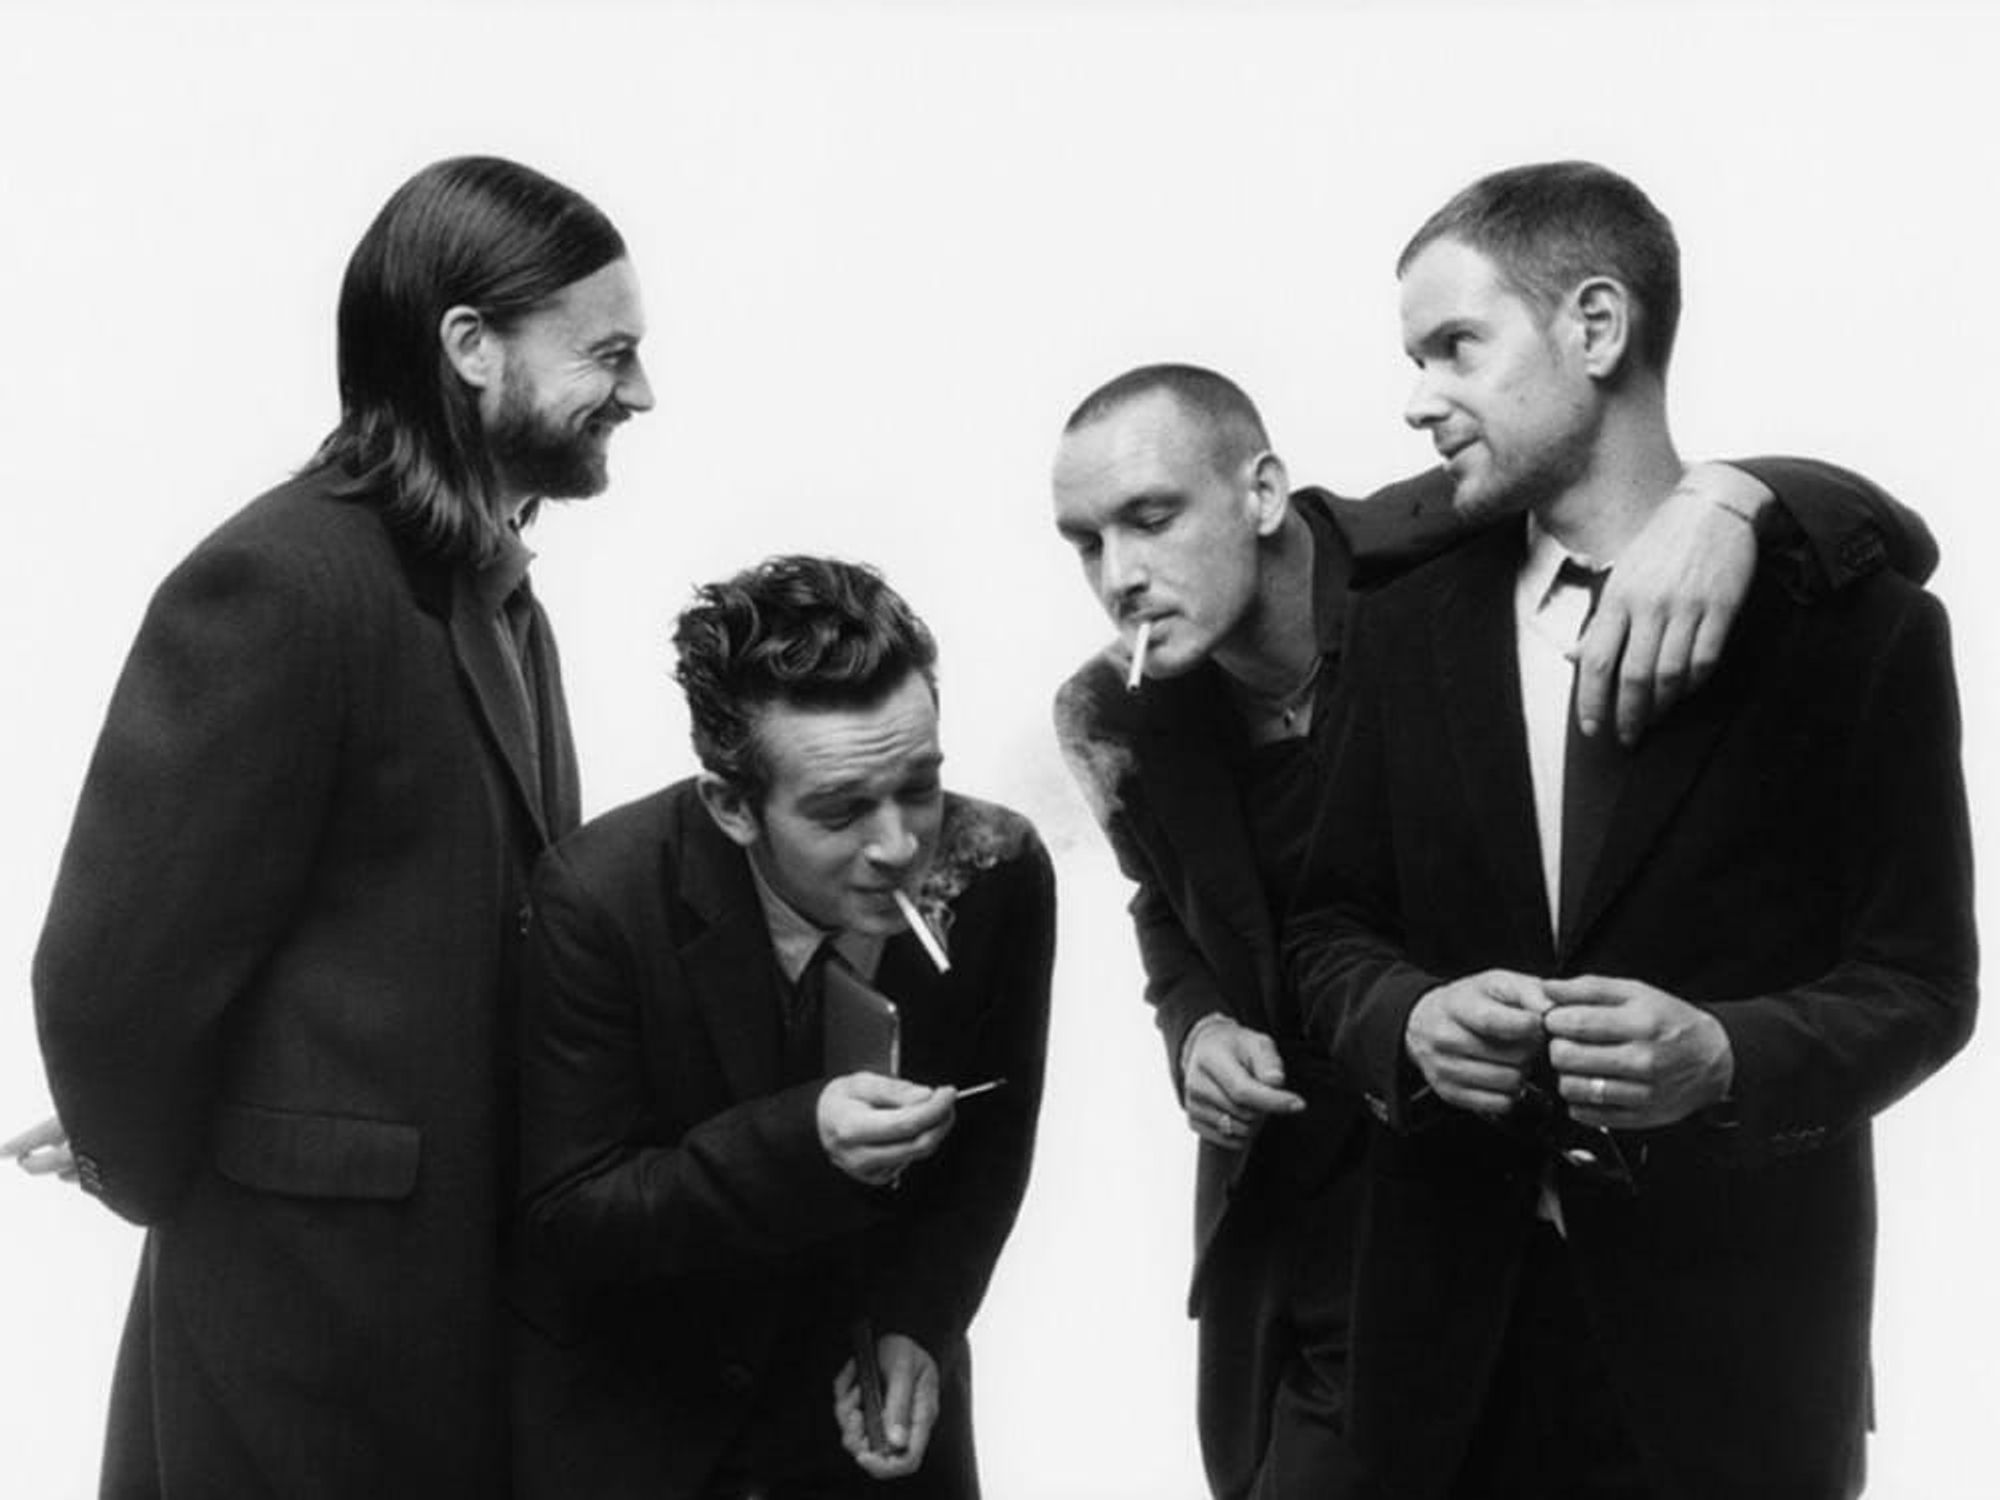 The 1975 band